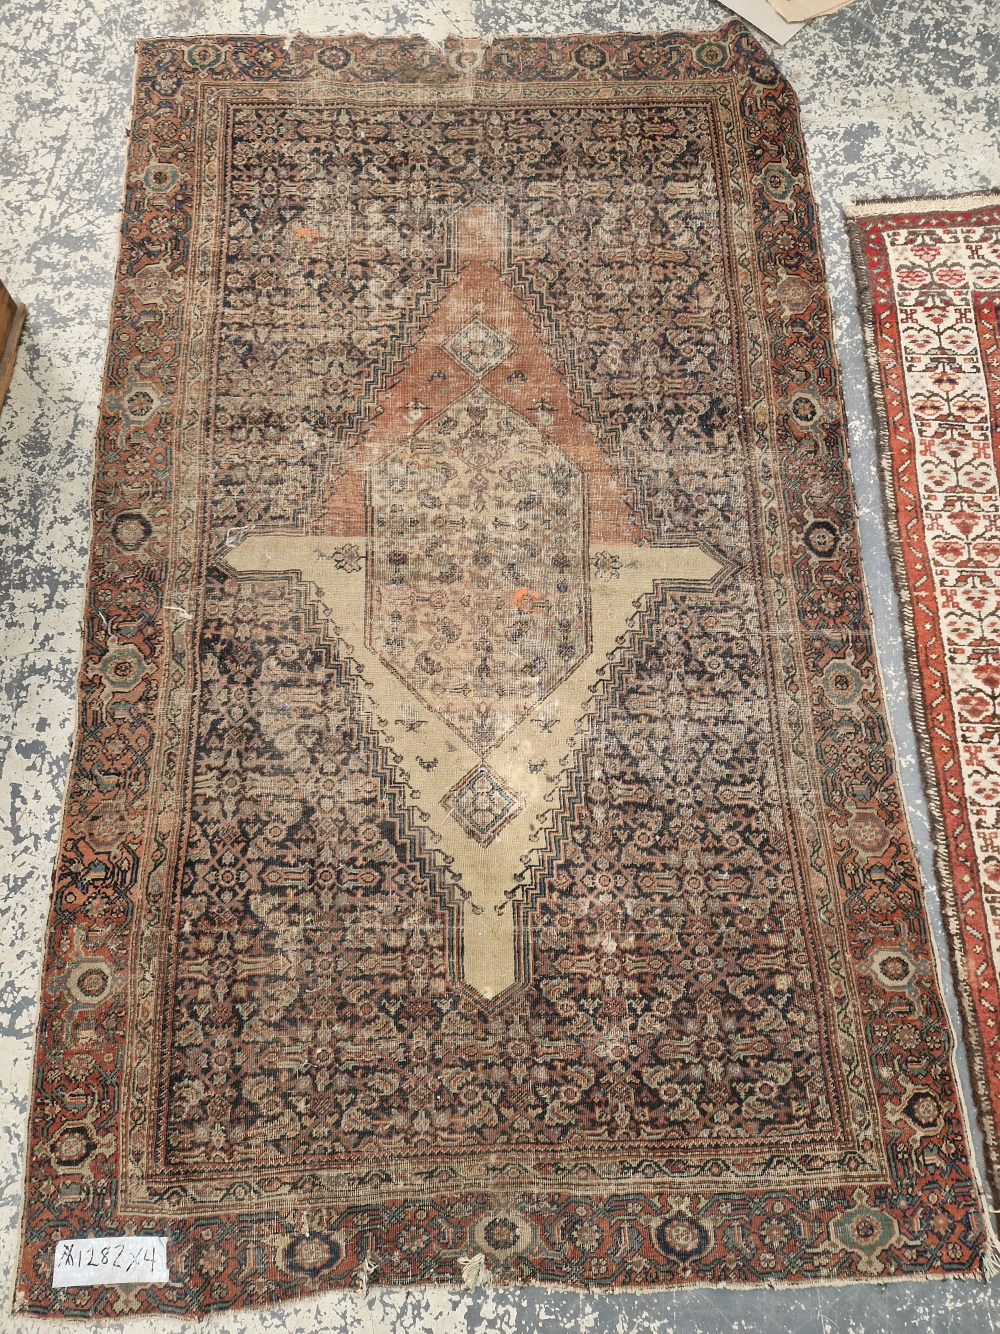 A TURKISH RUG OF CAUCASIAN DESIGN 186 x 109cm, TOGETHER WITH TWO ANTIQUE PERSIAN RUGS AND AN